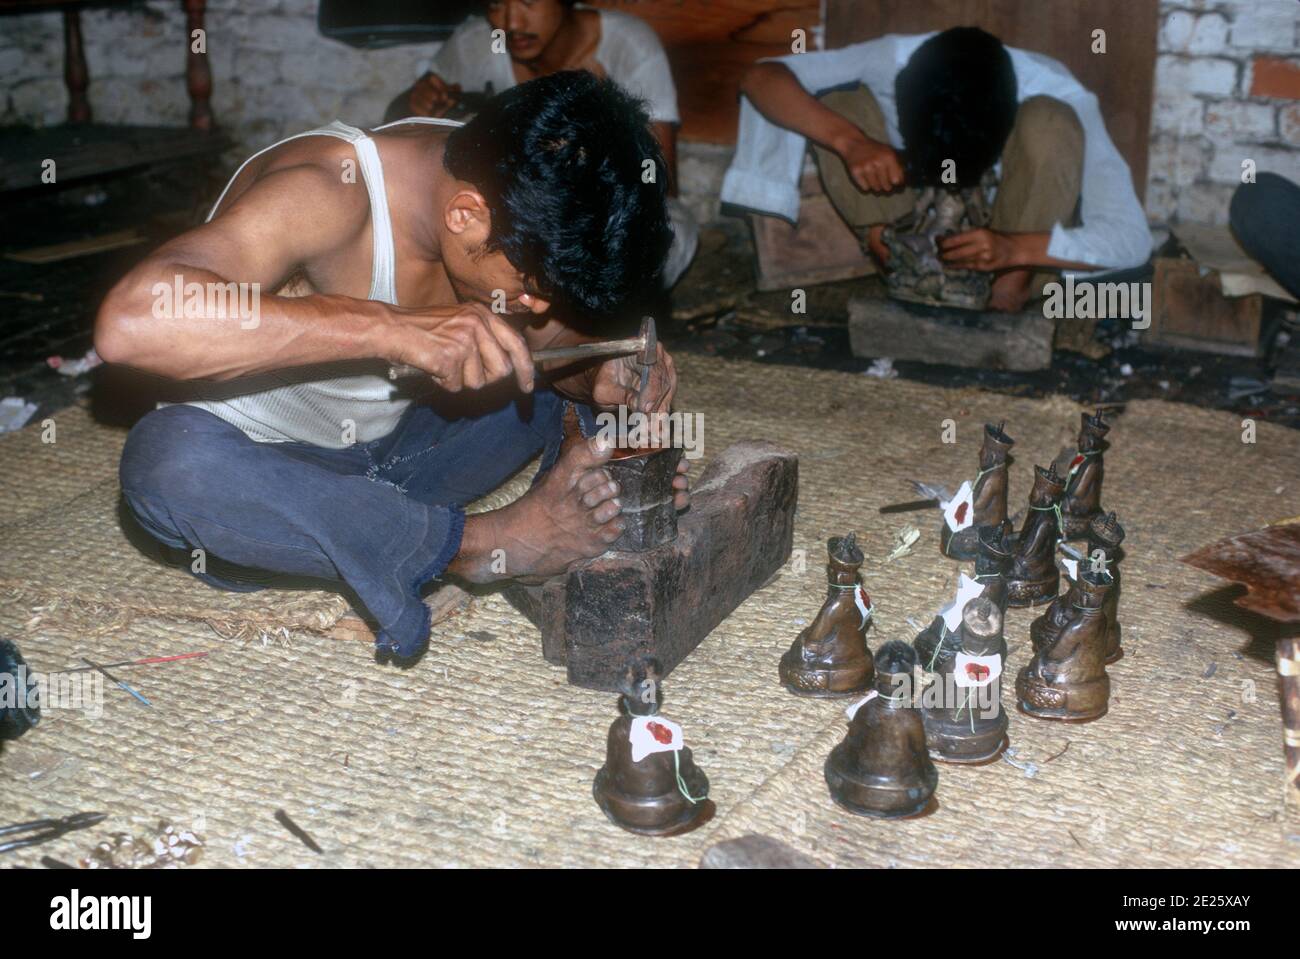 Nepali artisans cleaning up figurines produced by the process of lost wax metal casting of statues and figurines in Nepal Stock Photo